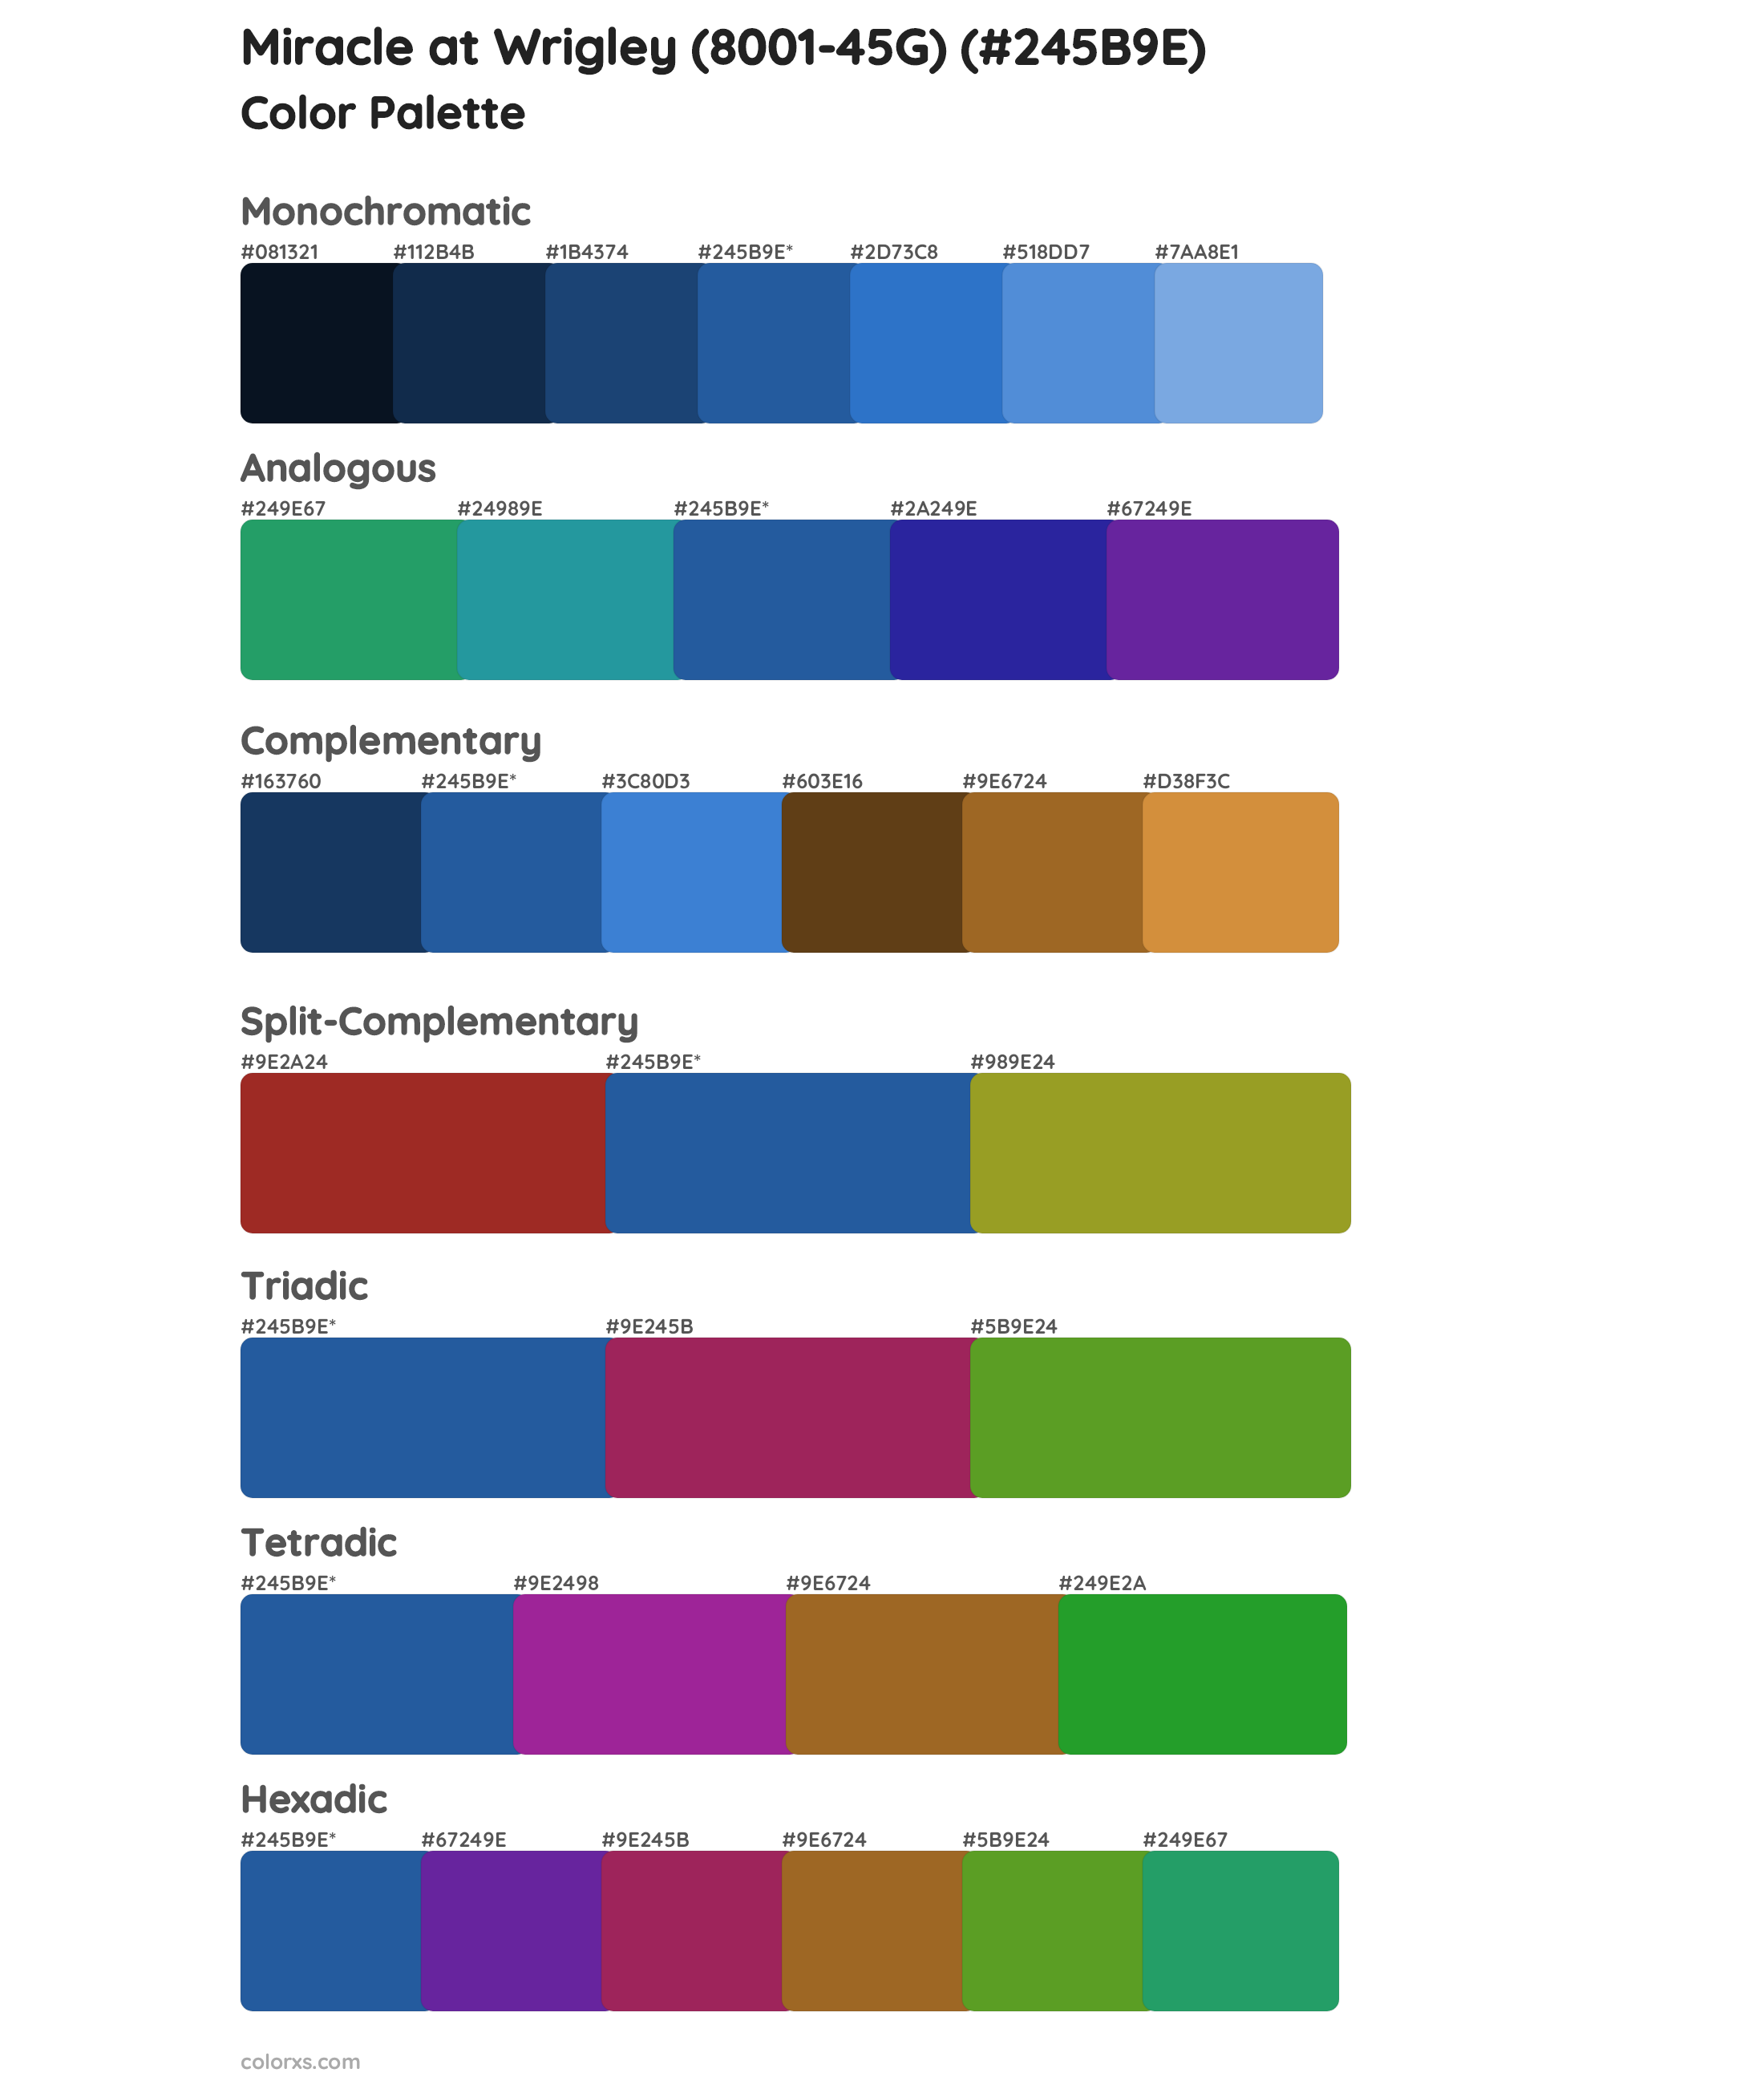 Miracle at Wrigley (8001-45G) Color Scheme Palettes